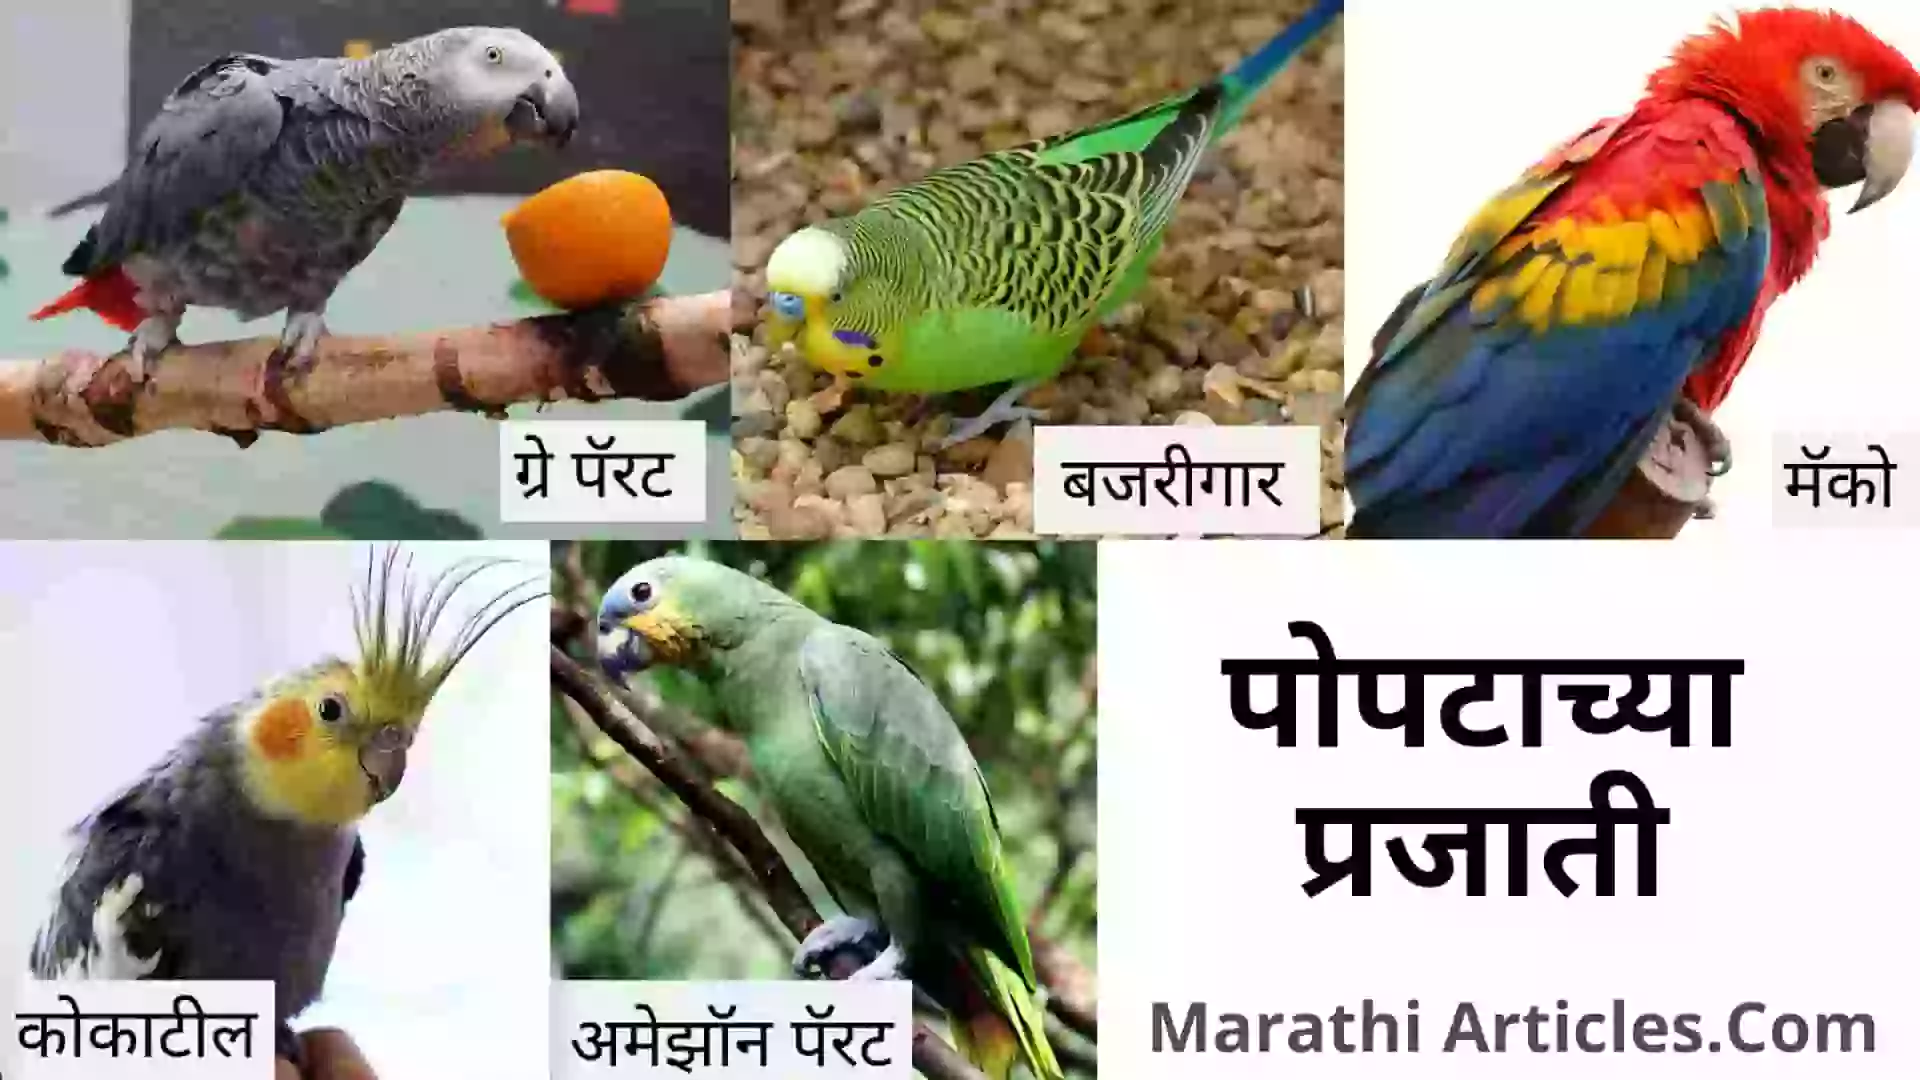 Information about parrot in marathi